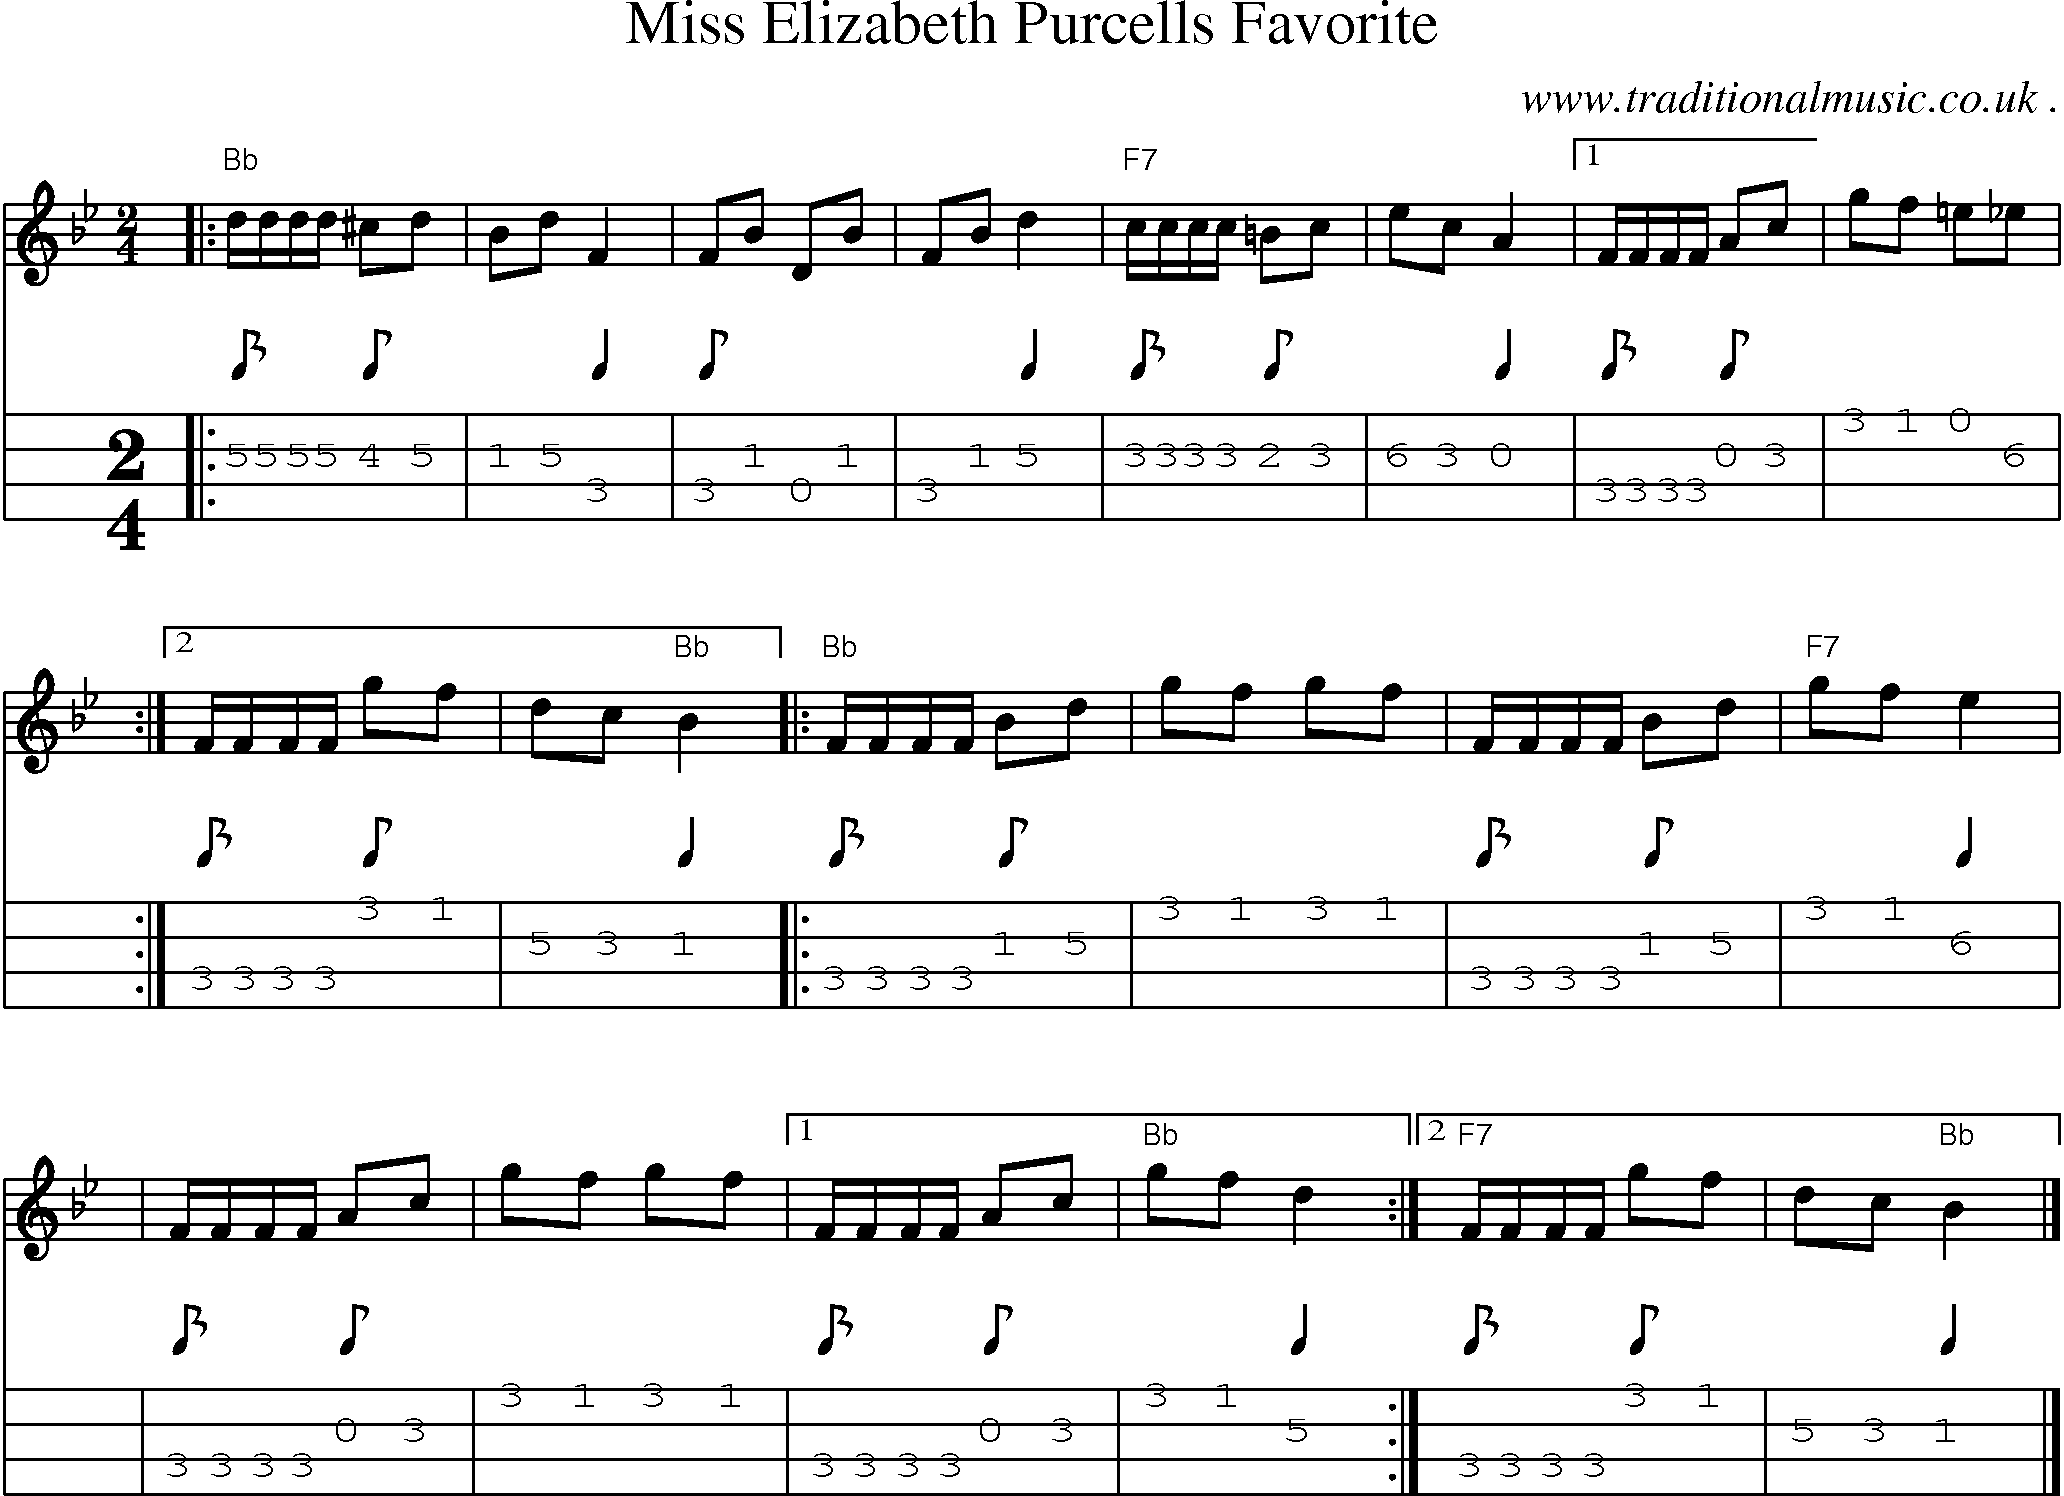 Sheet-music  score, Chords and Mandolin Tabs for Miss Elizabeth Purcells Favorite